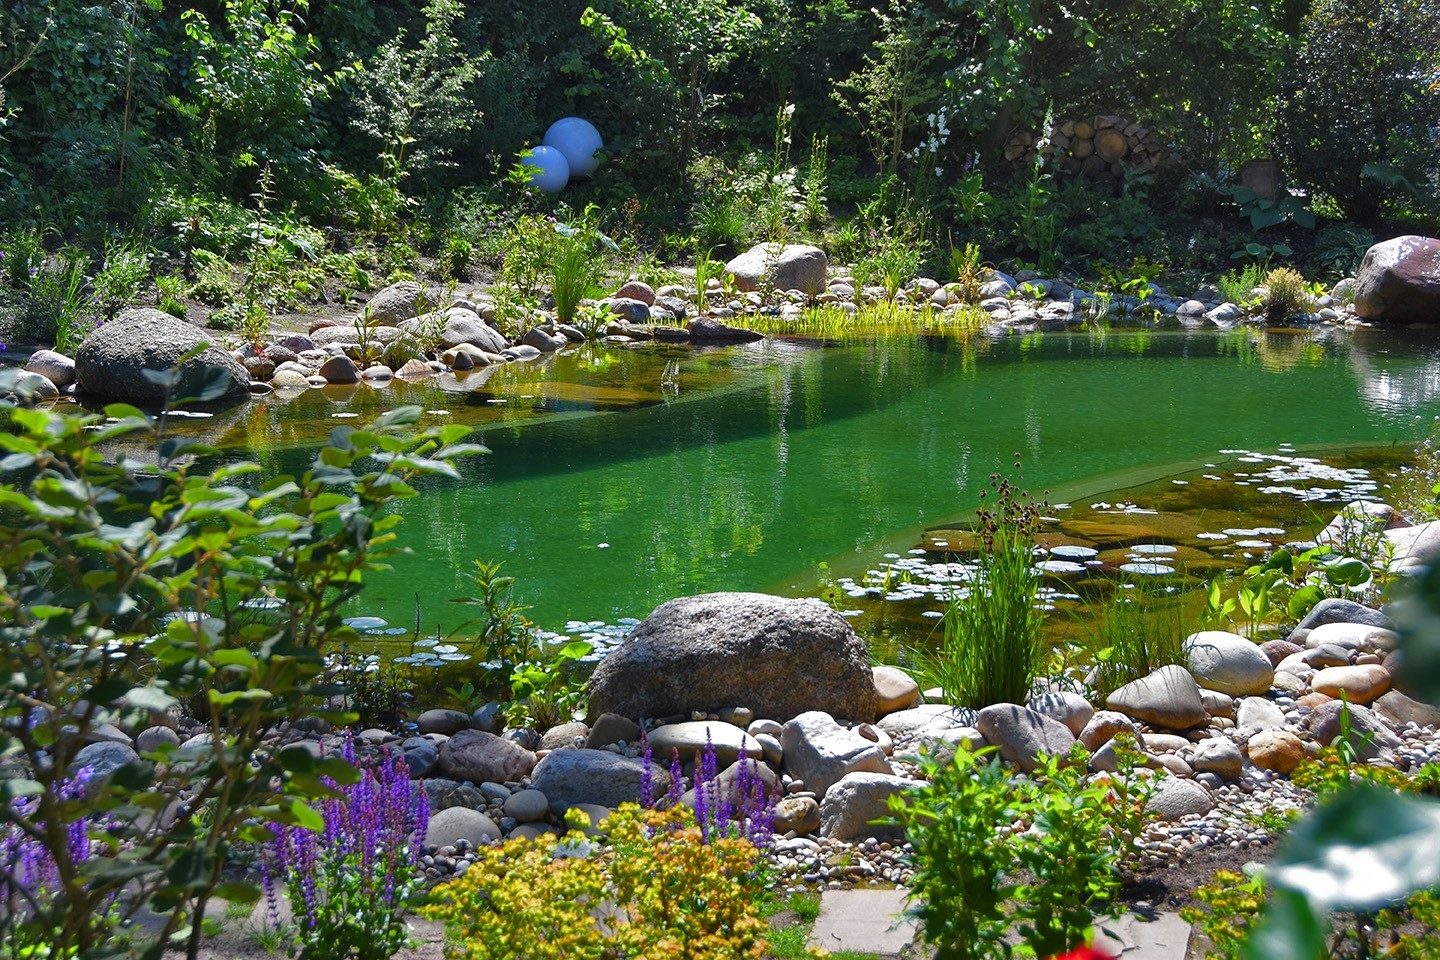 A curved swimming pond in the garden surrounded by flowers and stones